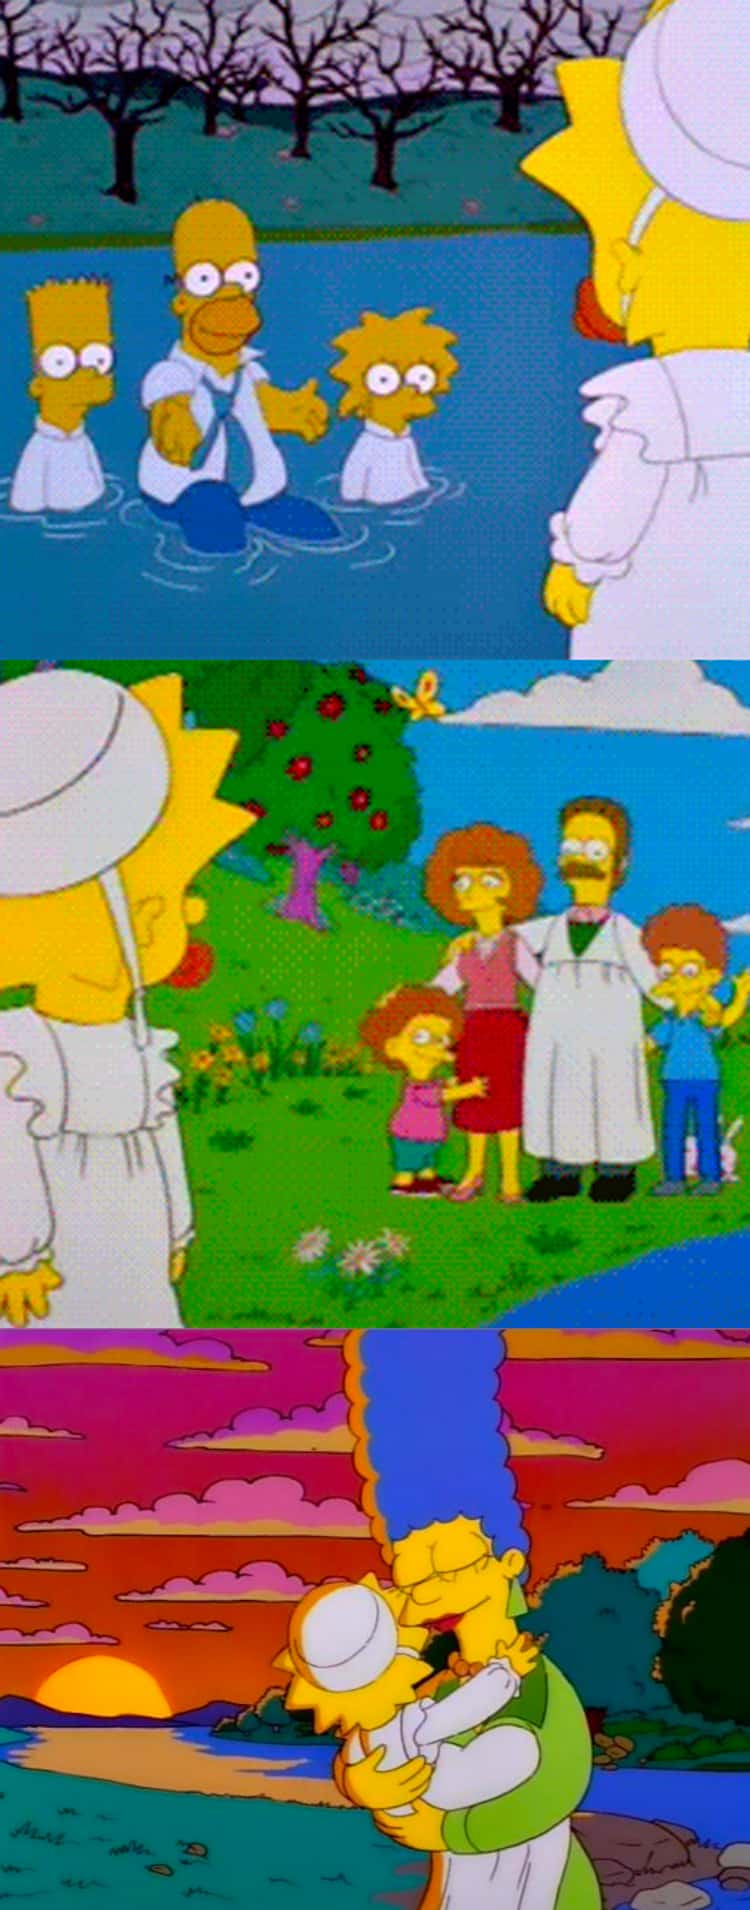 10 'The Simpsons' Episodes That Made Us Shed a Tear